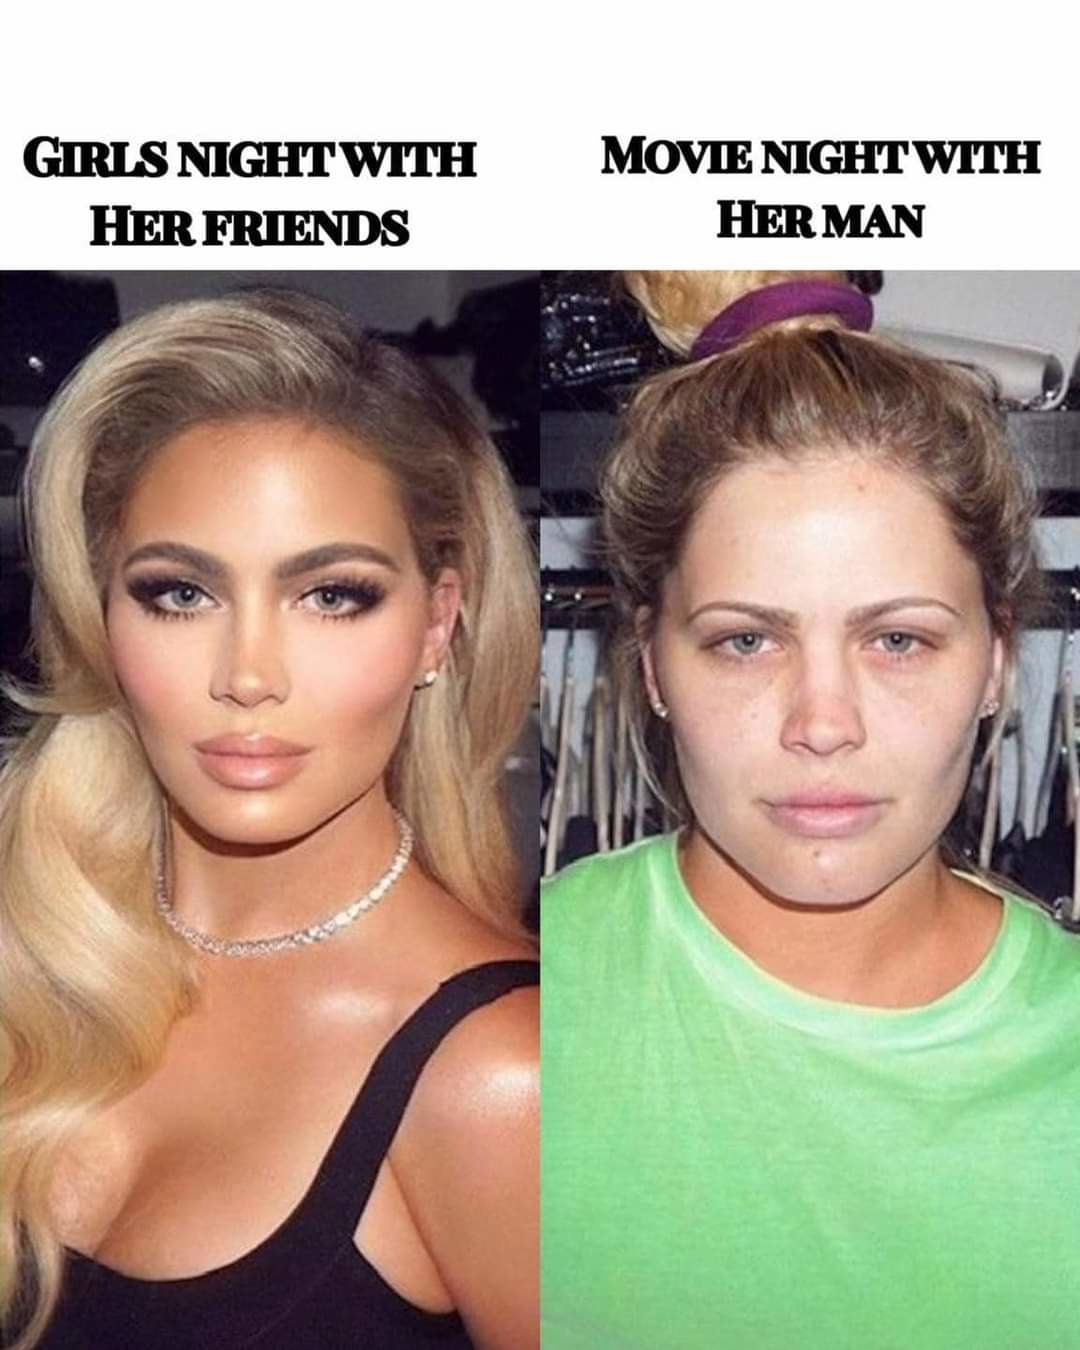 "Just some girls from work" - meme